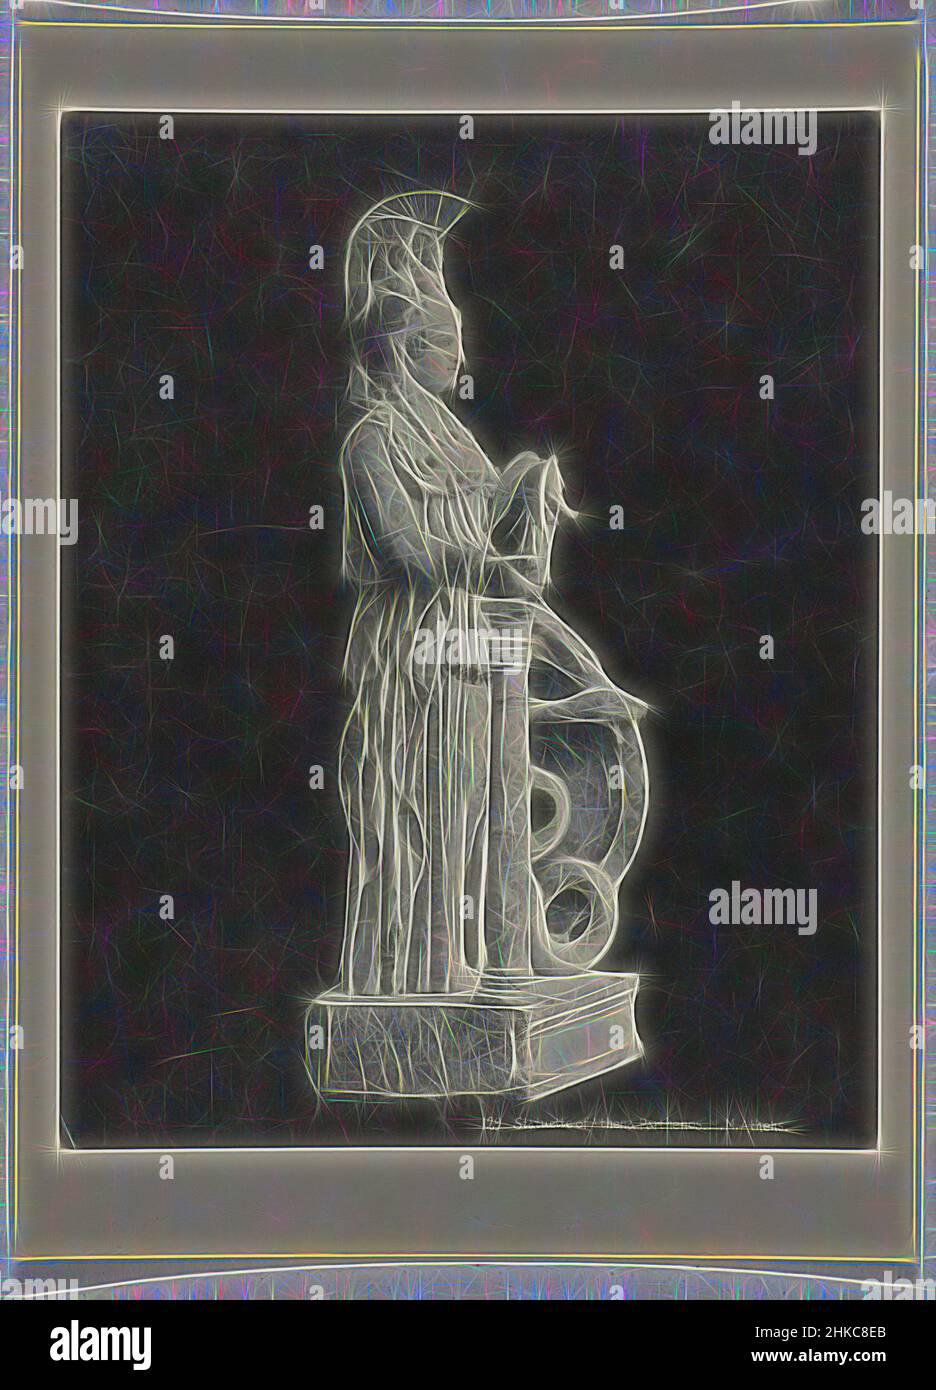 Inspired by Statue of Pallas Athene129 Statuette of Athena Parthenos. N.M. Athens., Statue that stood in the center of the Parthenon., Athene, c. 1895 - c. 1915, paper, collotype, height 274 mm × width 216 mmheight 328 mm × width 239 mm, Reimagined by Artotop. Classic art reinvented with a modern twist. Design of warm cheerful glowing of brightness and light ray radiance. Photography inspired by surrealism and futurism, embracing dynamic energy of modern technology, movement, speed and revolutionize culture Stock Photo